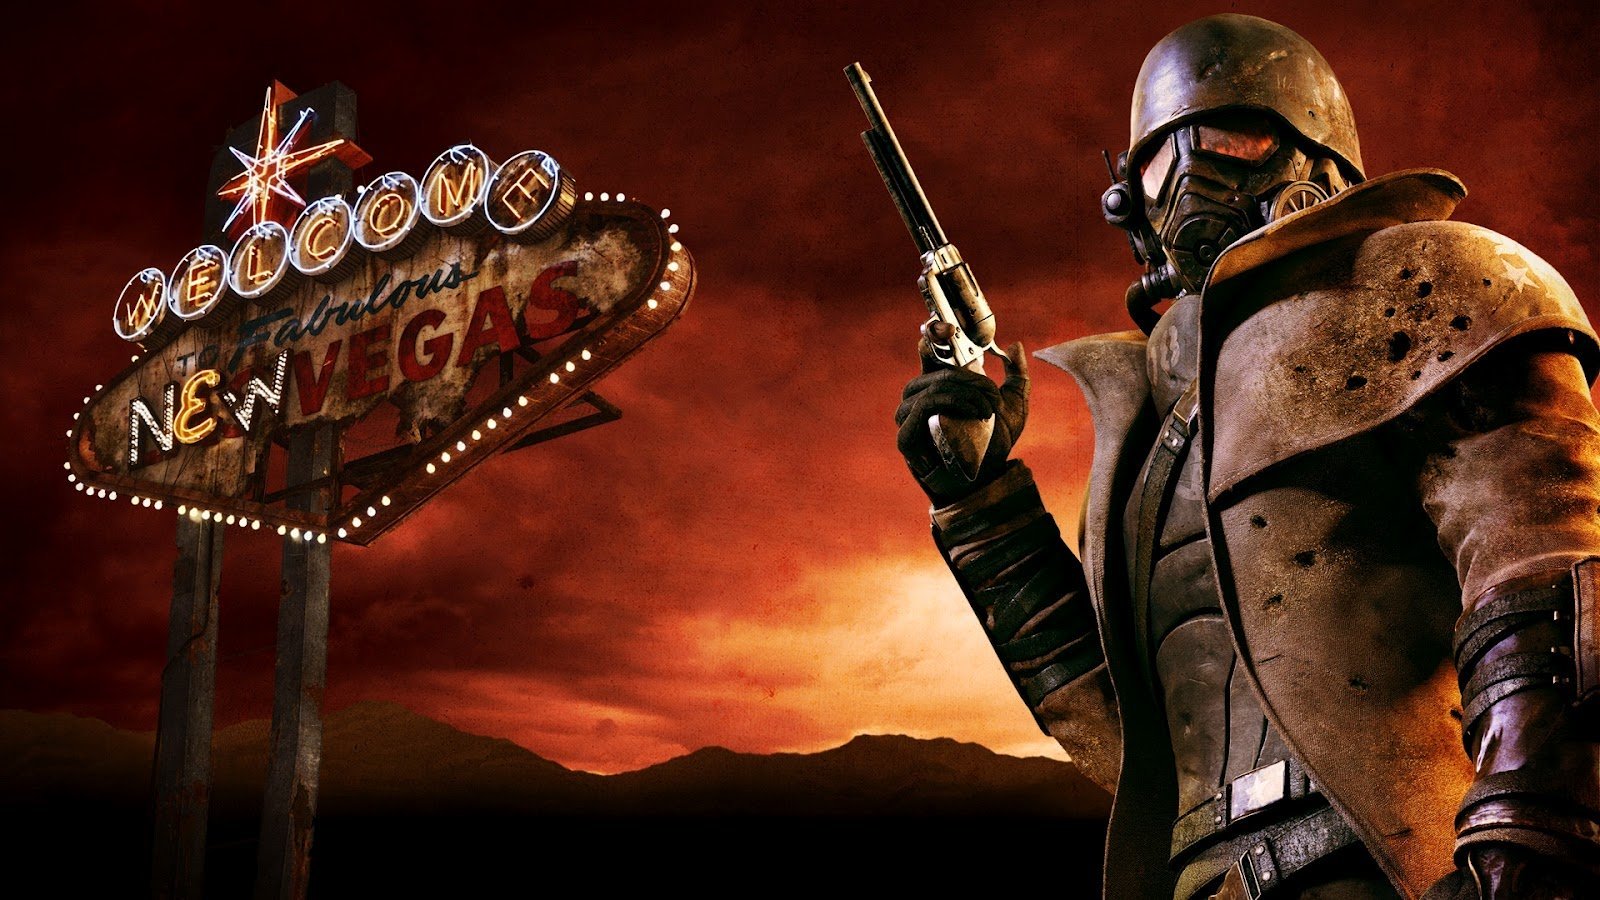 Fallout New Vegas 2 CONFIRMED?! 